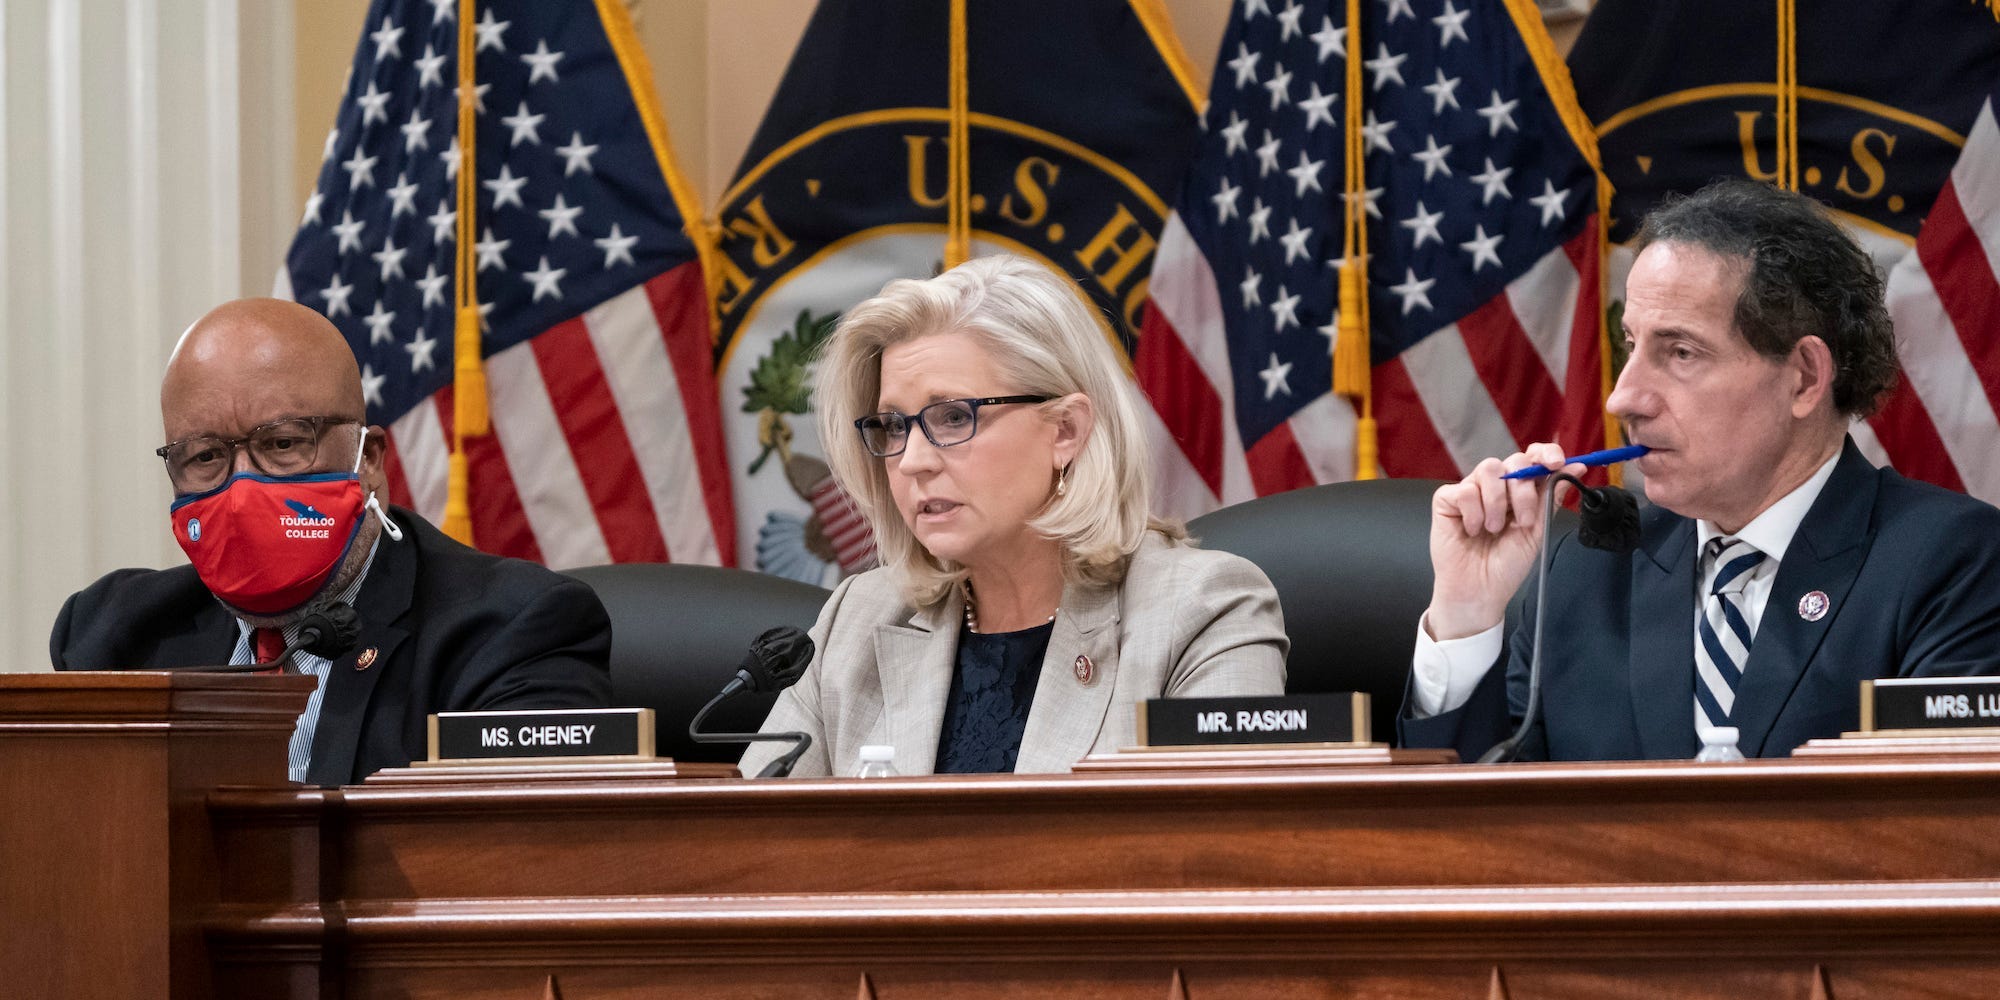 Rep. Liz Cheney, R-Wyo., vice chair of the House panel investigating the Jan. 6 U.S. Capitol insurrection, is flanked by Chairman Bennie Thompson, D-Miss., left, and Rep. Jamie Raskin, D-Md., as they vote on pursuing contempt charges against former President Donald Trump's White House chief of staff Mark Meadows for not complying with a subpoena, at the Capitol in Washington, Monday, Dec. 13, 2021.